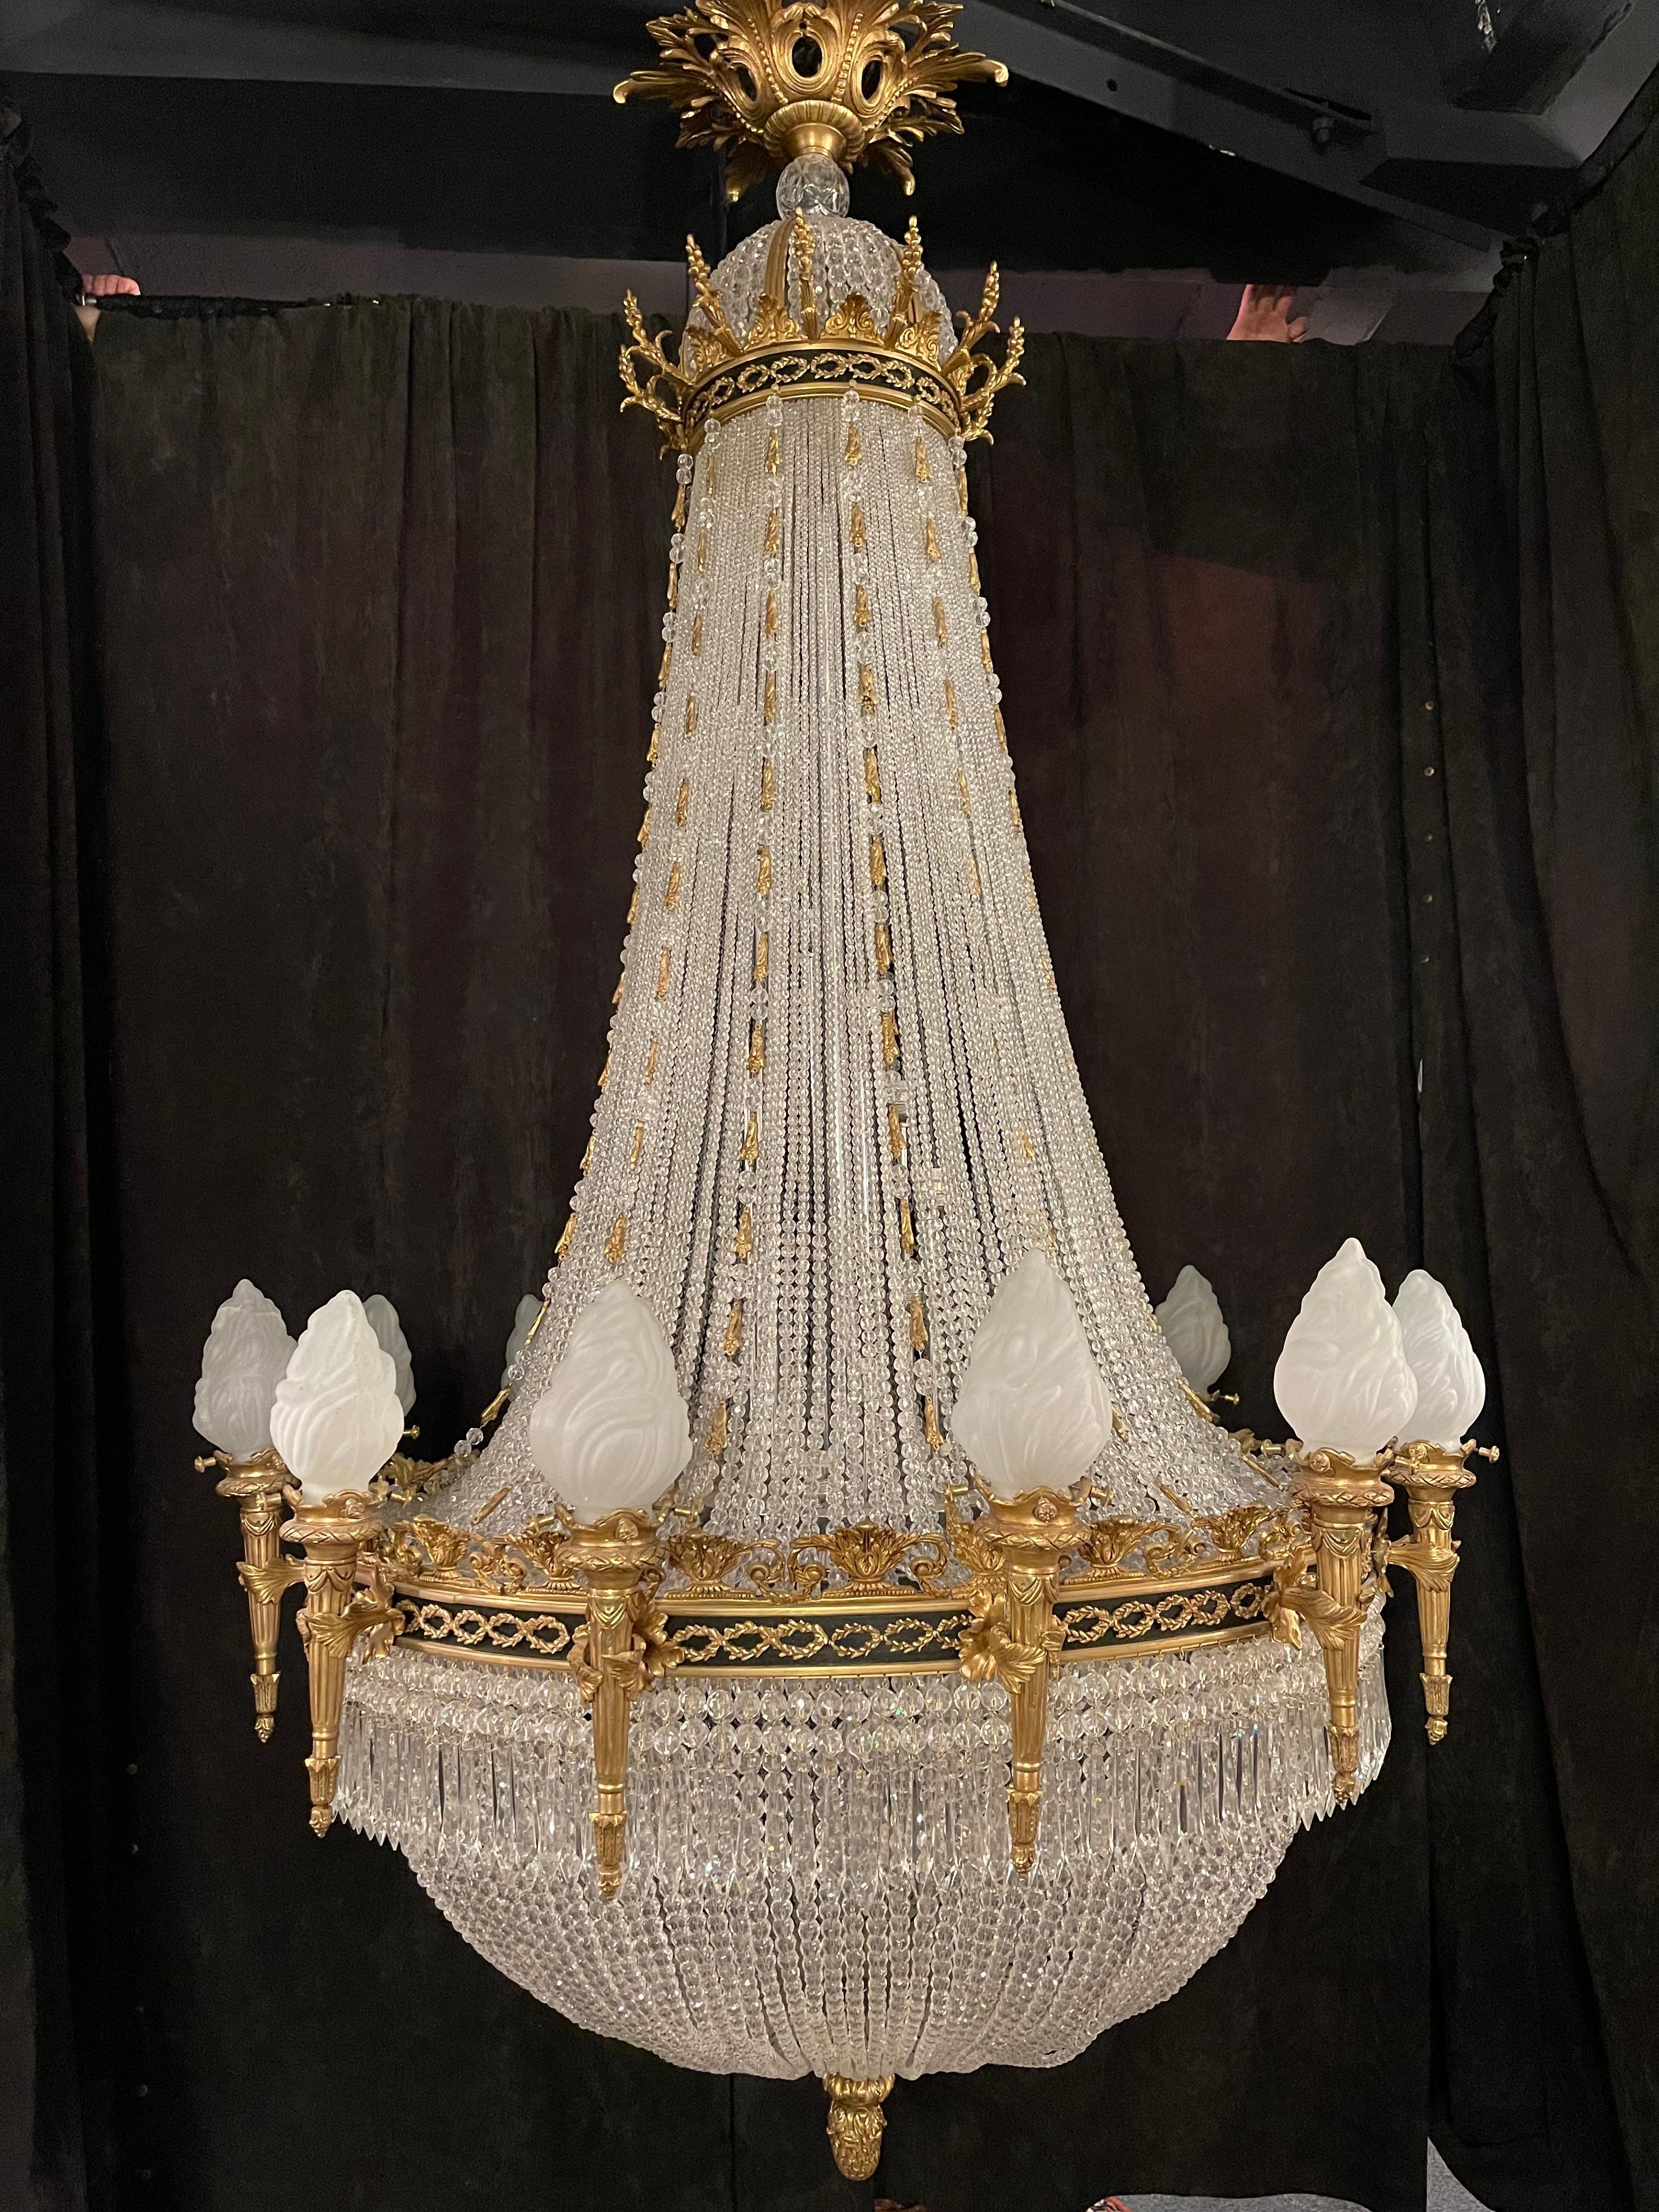 Monumental Classicist ceiling chandelier, crystal brass

Impressive chandelier, richly faceted. Wide body with 12 light arms.
Fine, engraved and cast Bronze. Basket-formed corpus from handcut frenches ball prisms. Connected through wide,